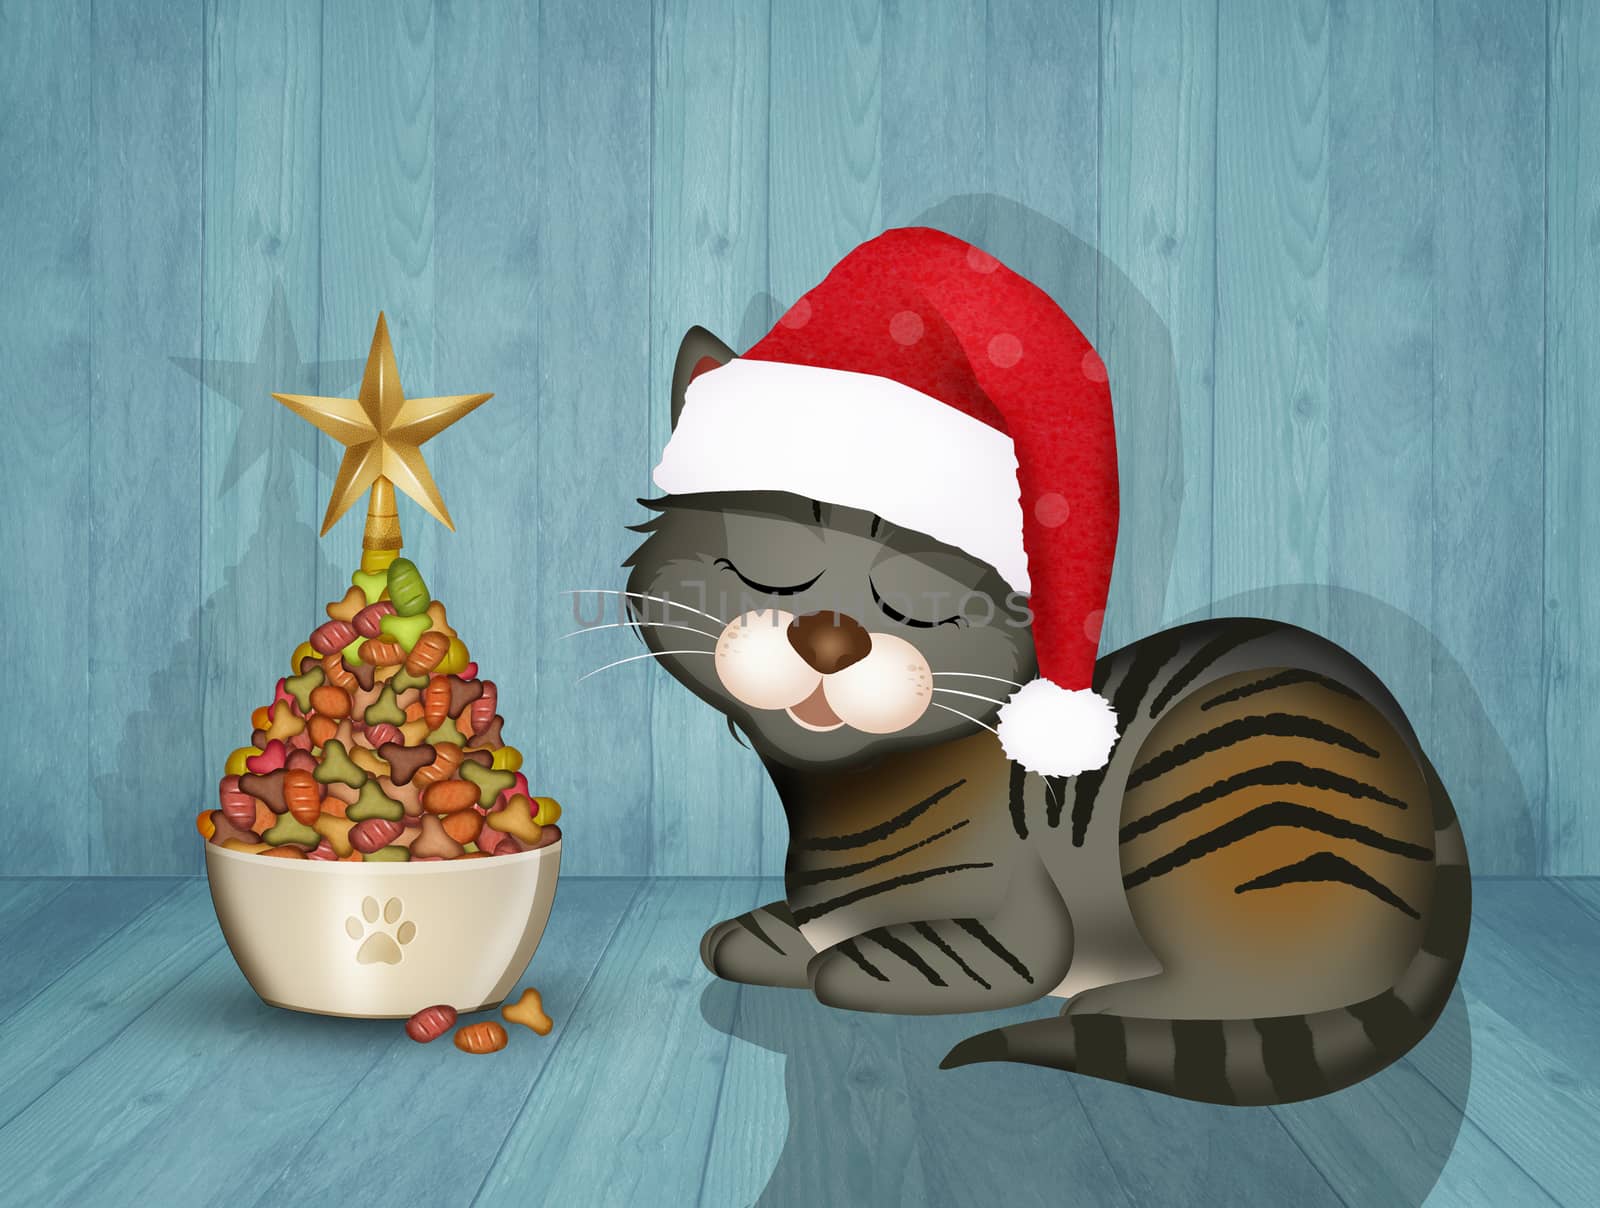 nice illustration of Christmas tree for cat